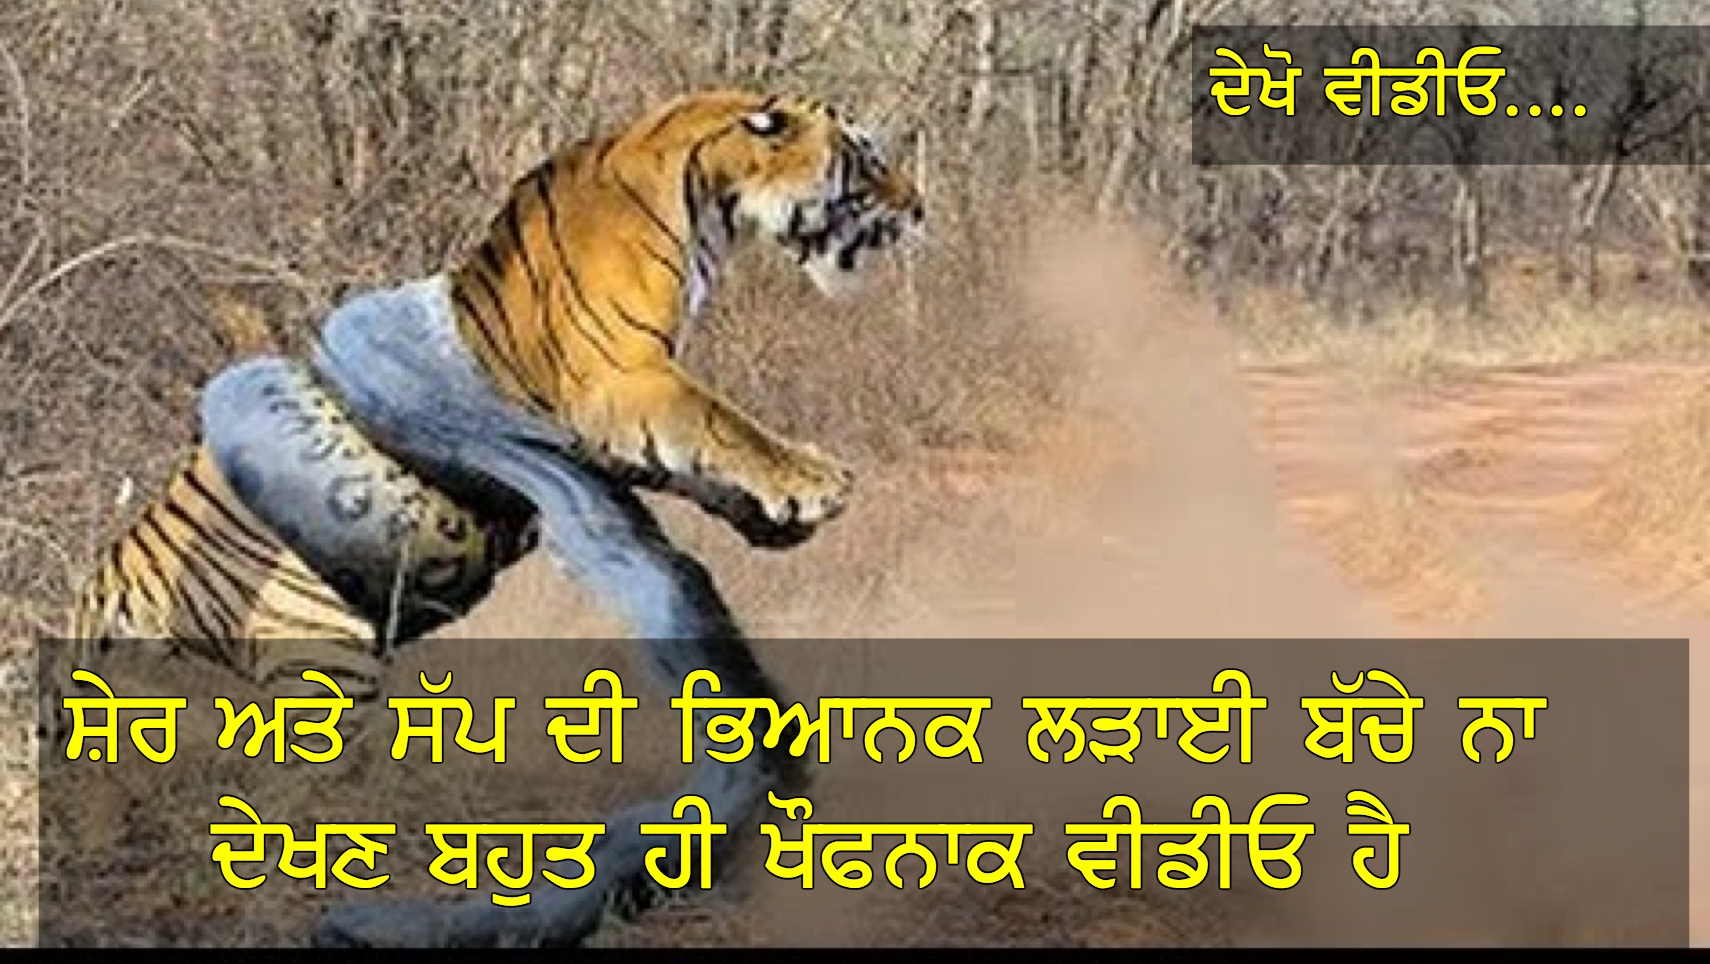 OMG!! Tiger and Snake Fight in jangle